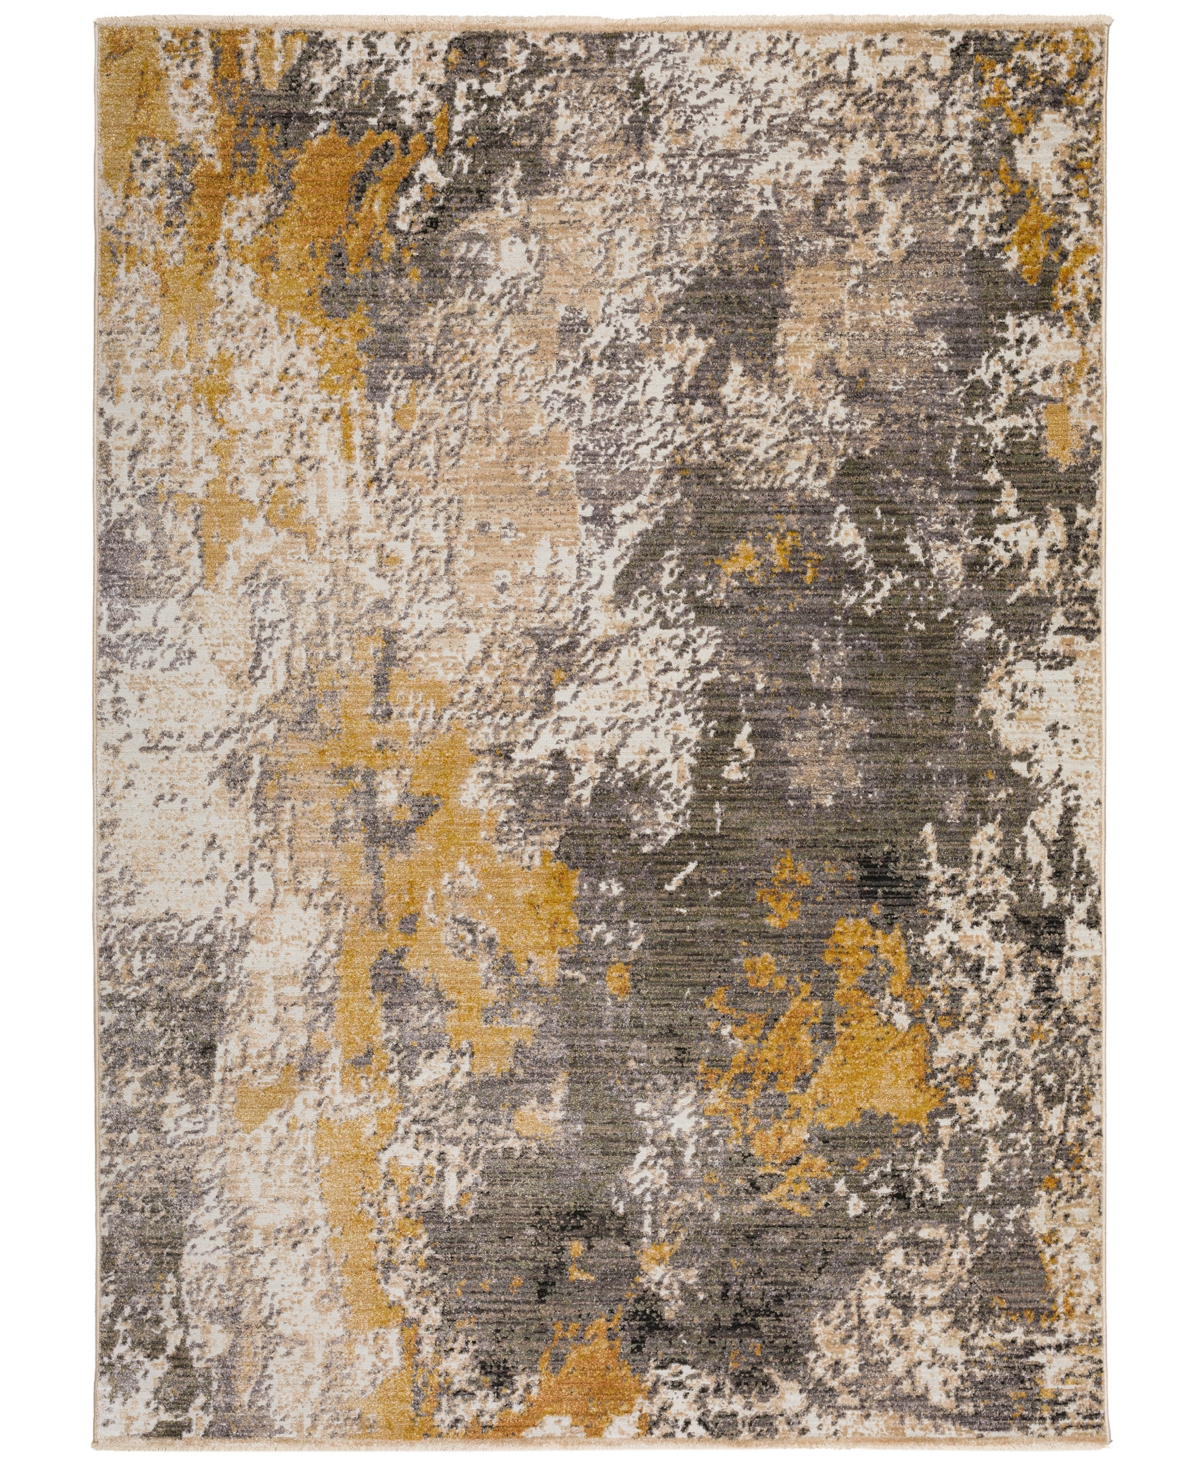 D Style Sergey Sgy9 7'10" X 10' Area Rug In Beige